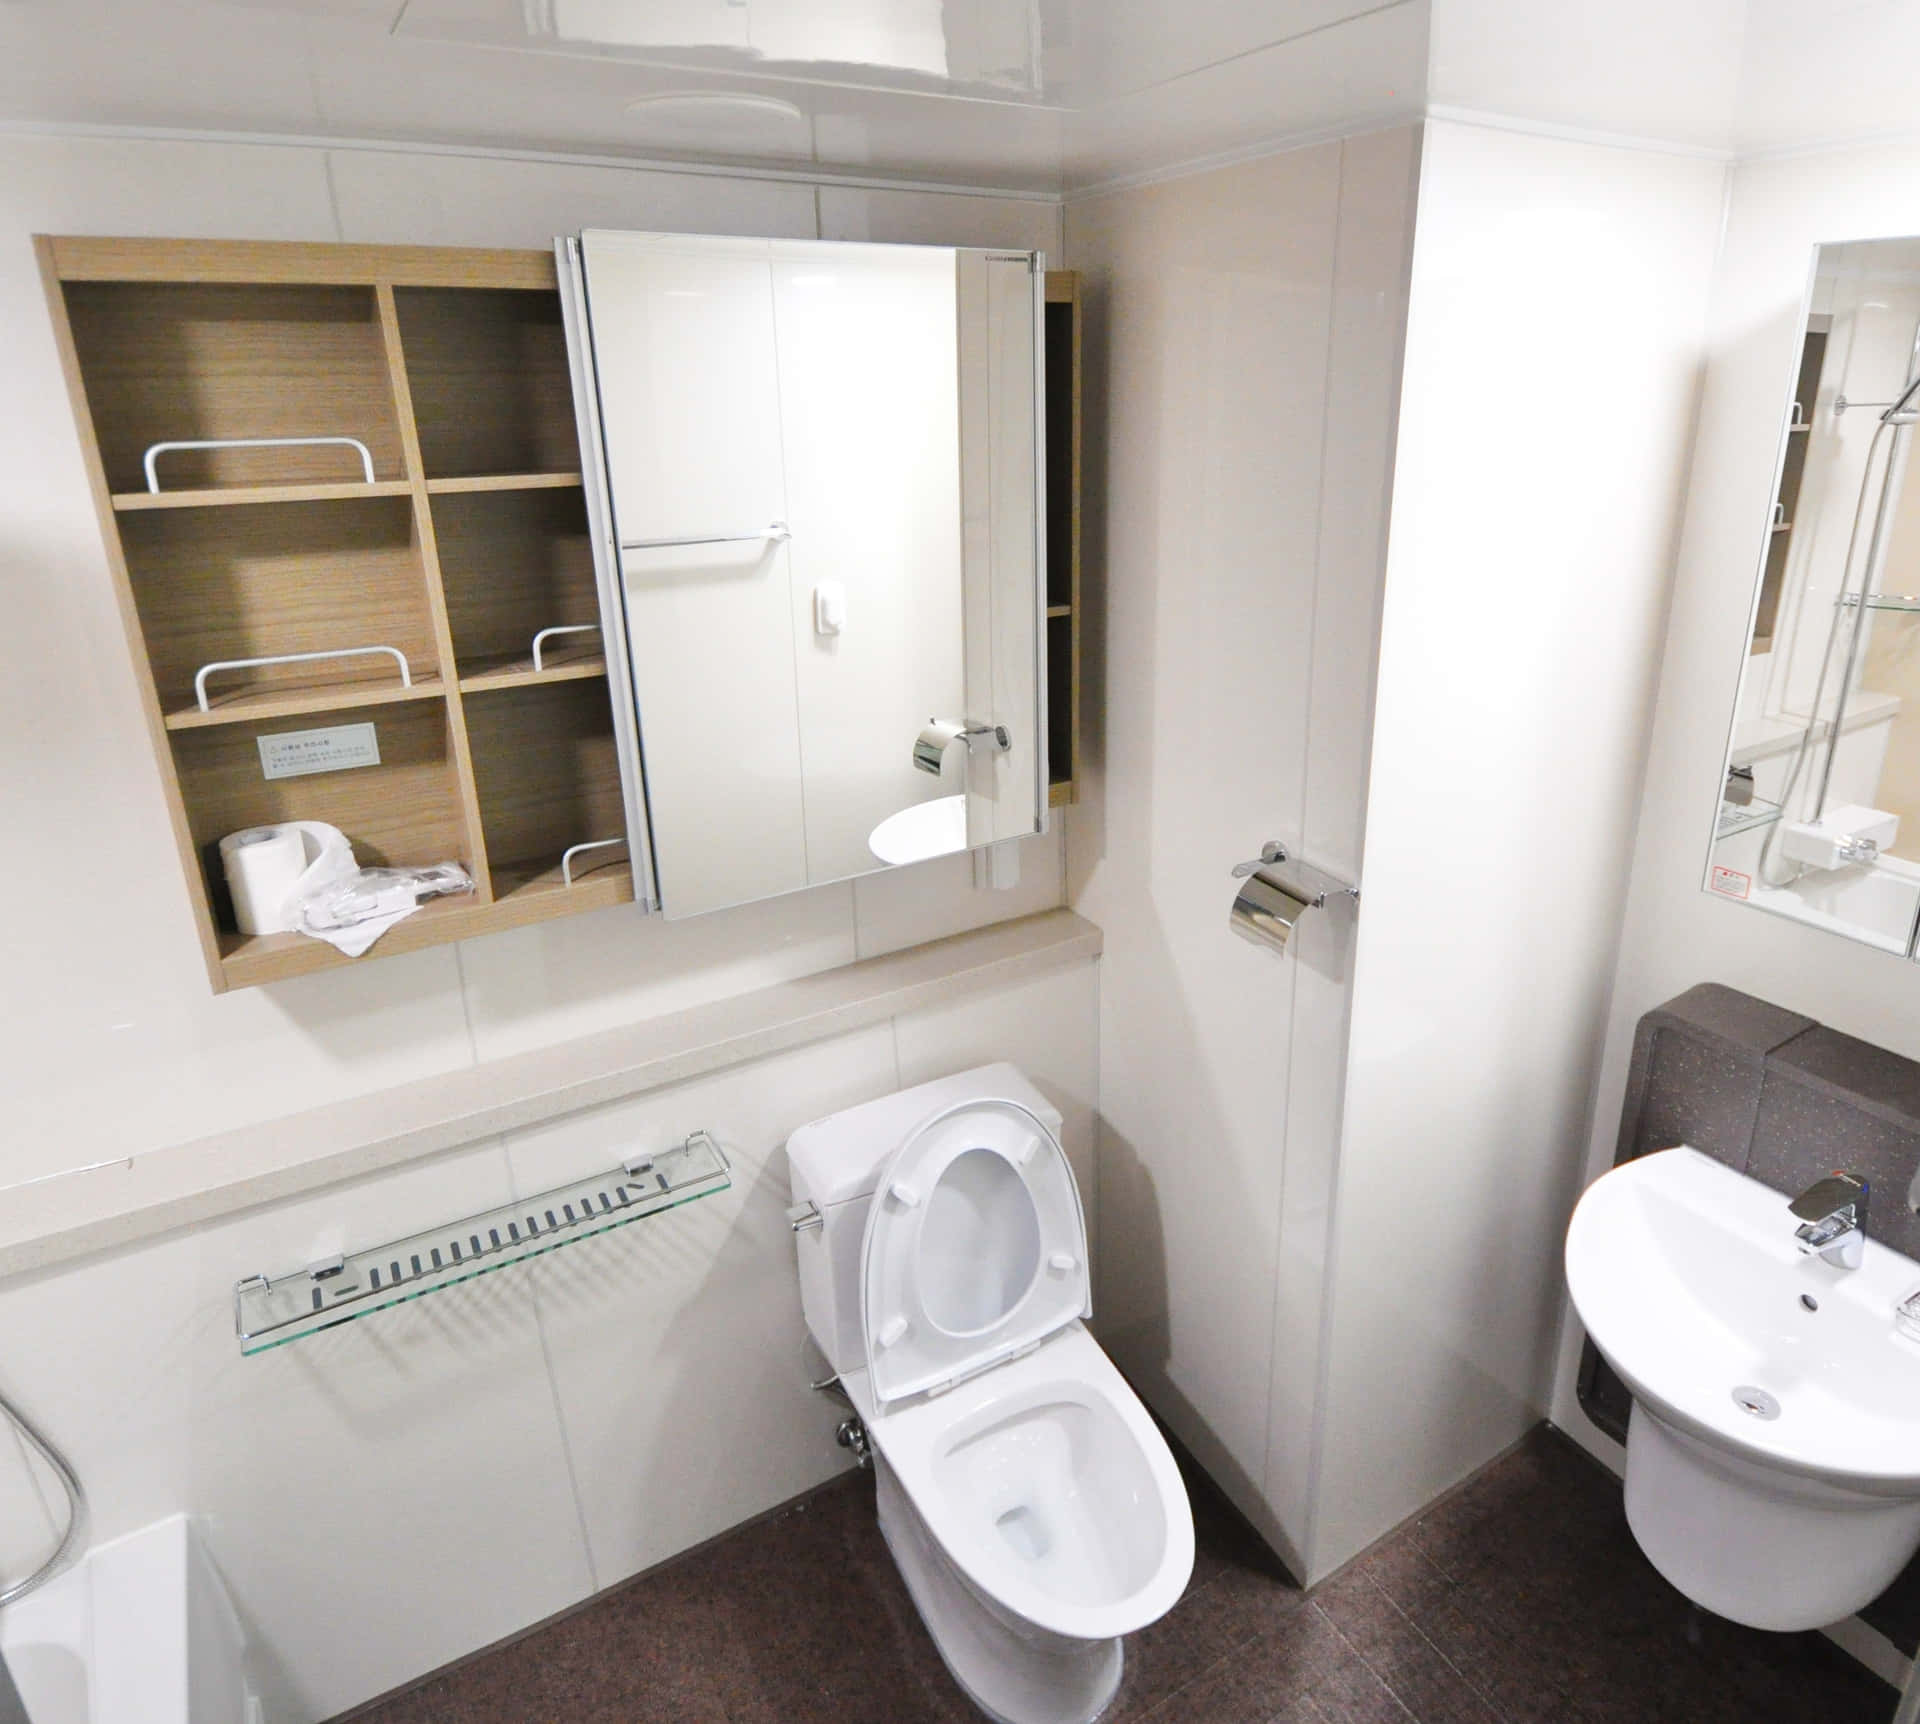 Freshen up your home with a modern, heated toilet